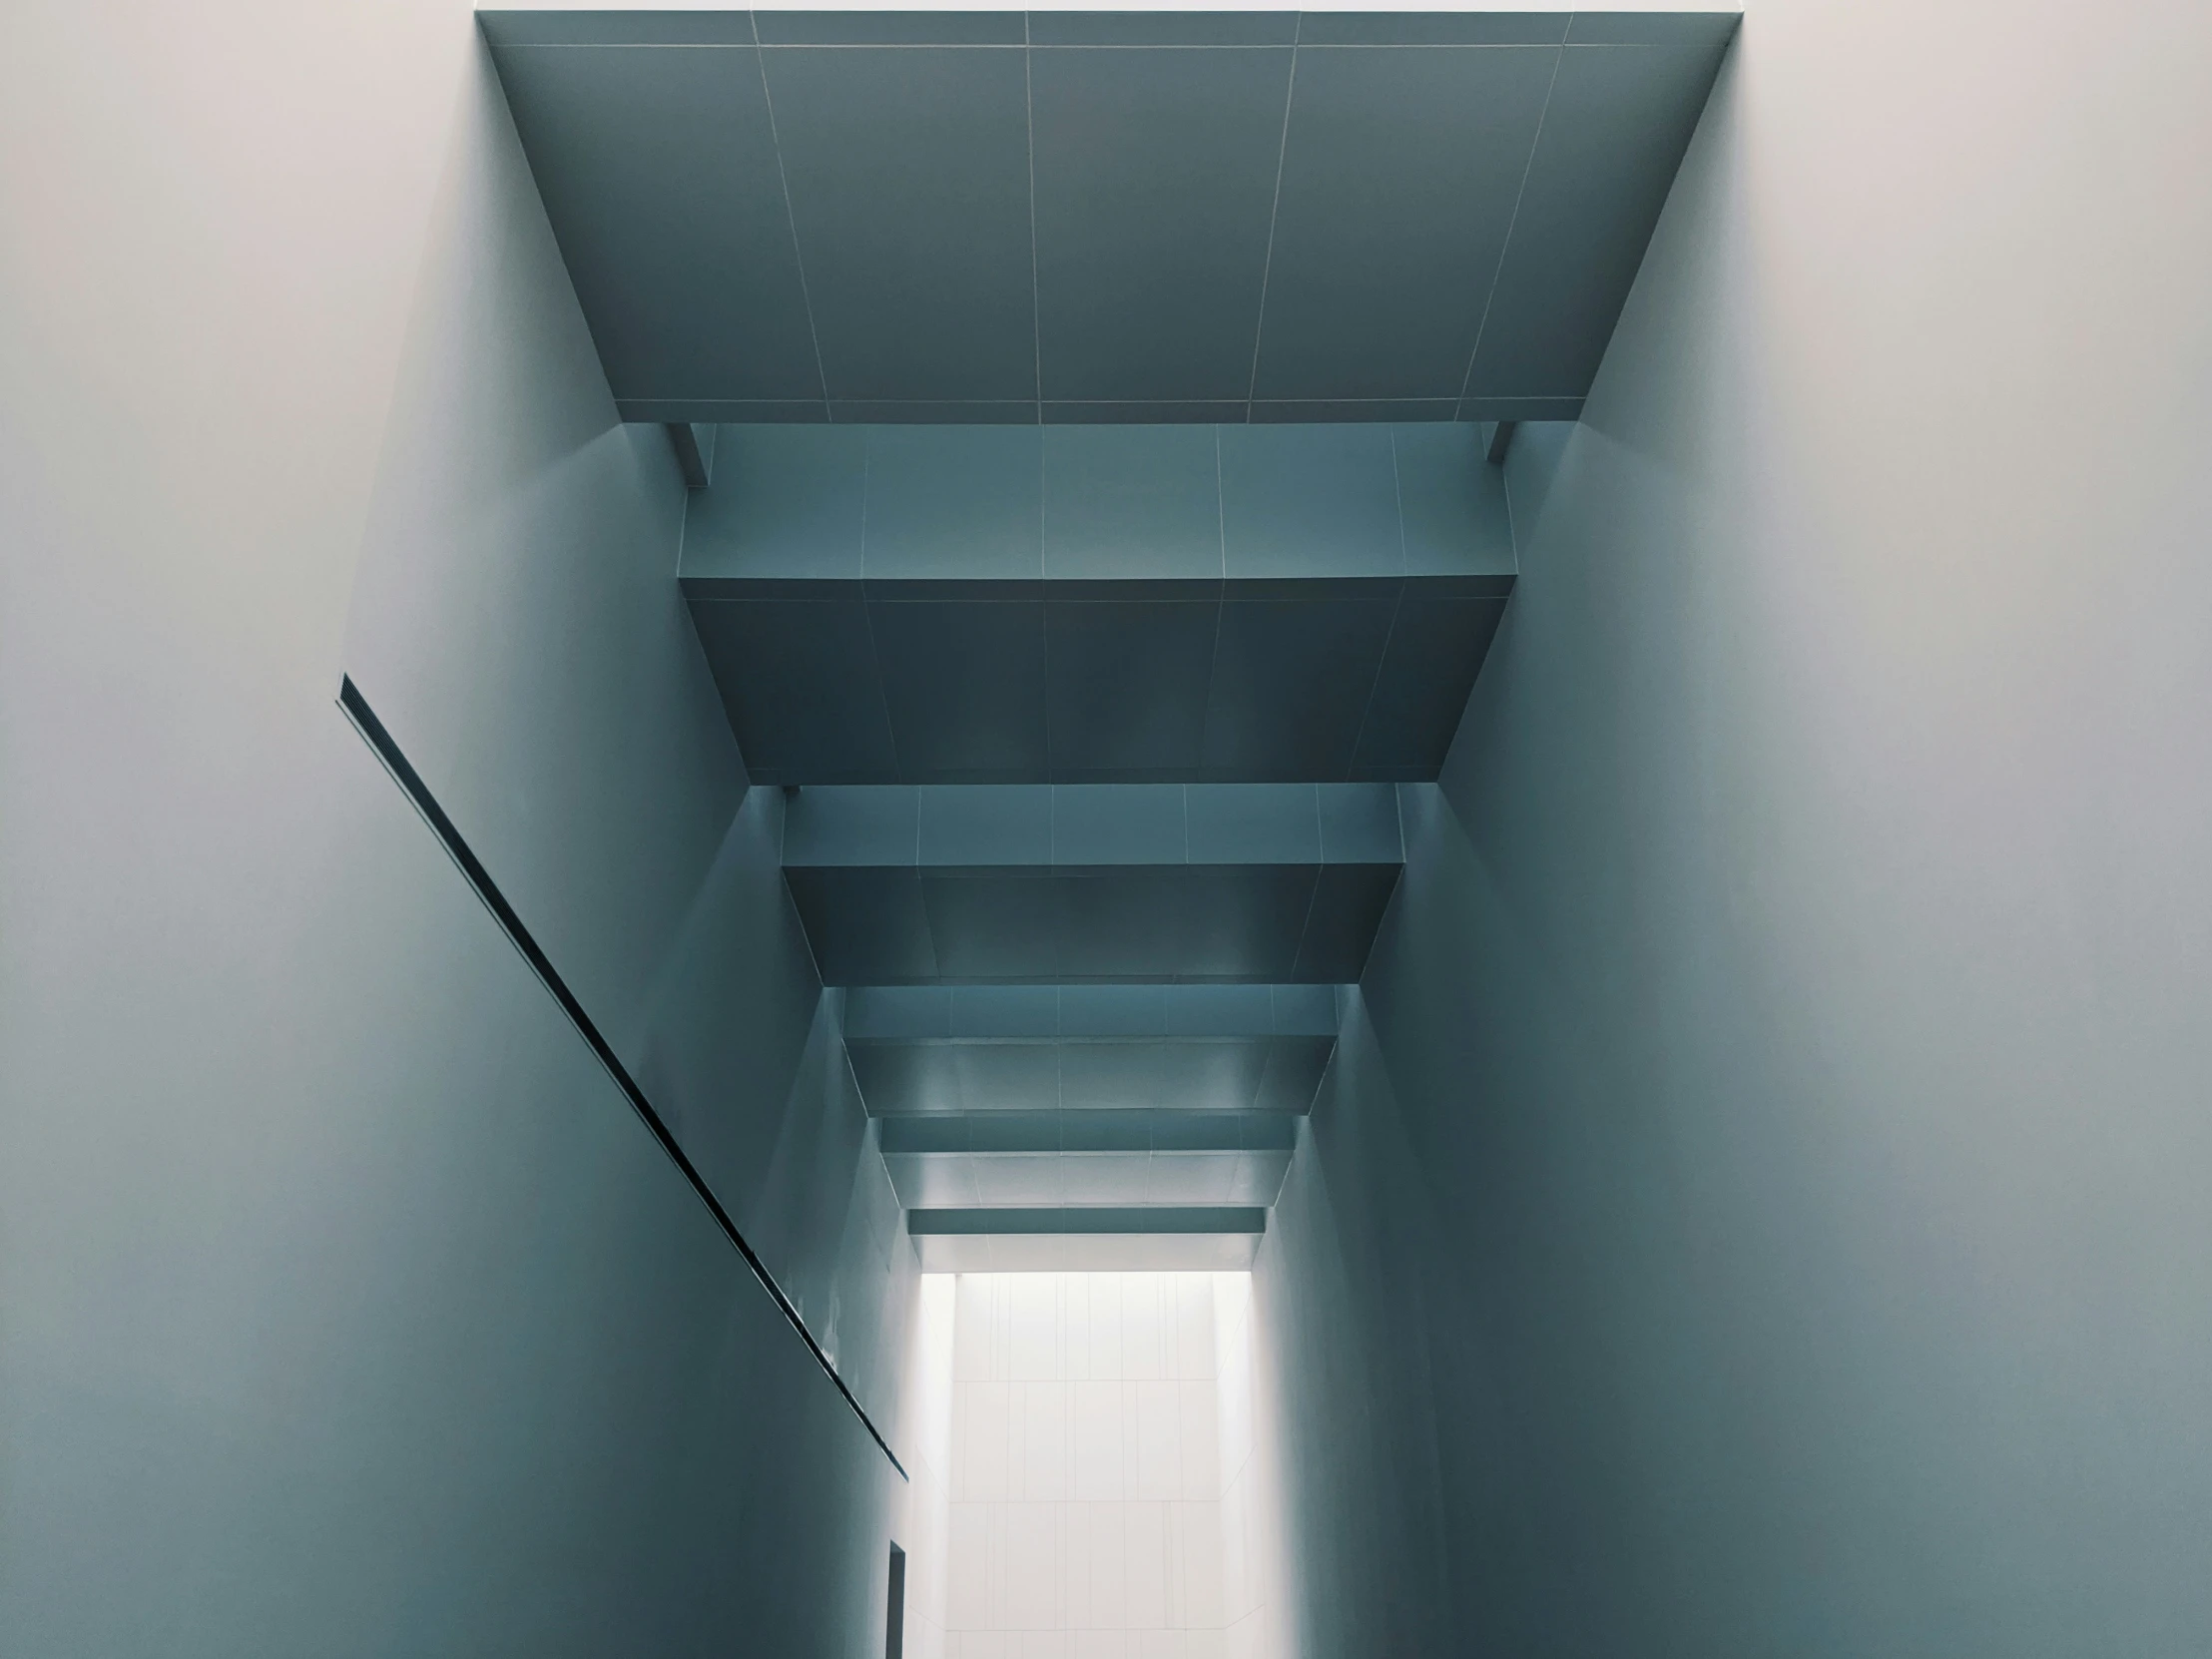 the walls and floor of an empty white room are